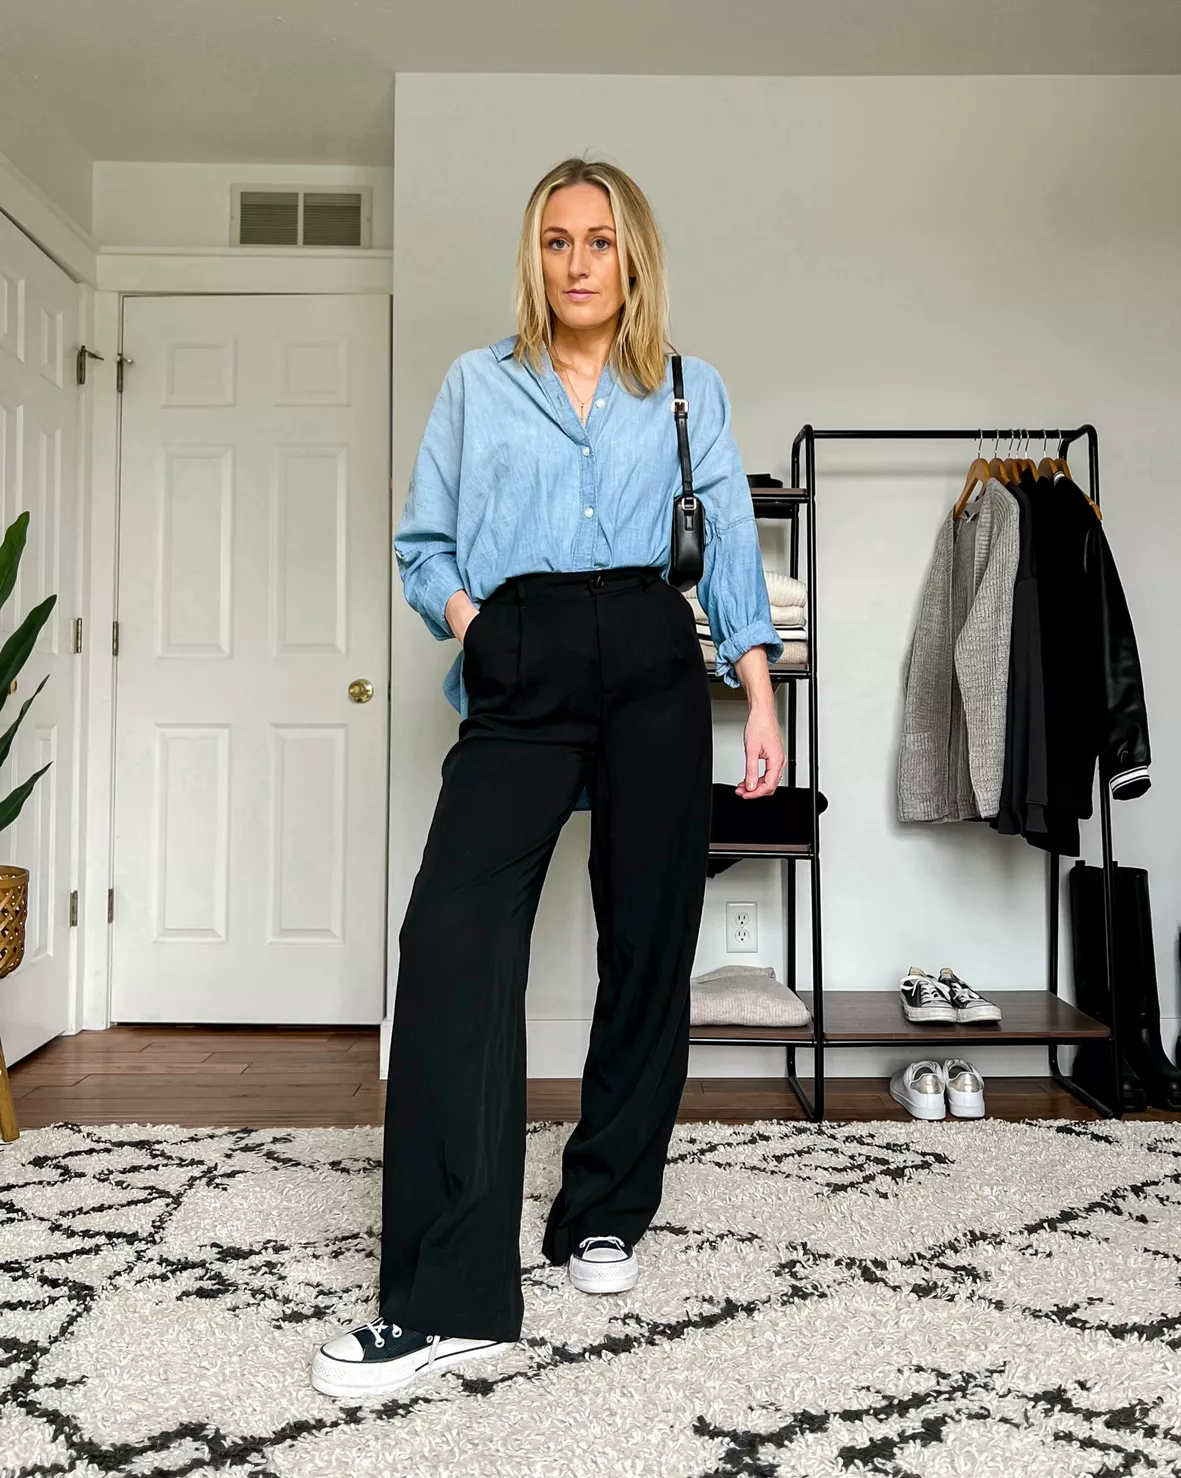 business outfit chambray shirt and black pant